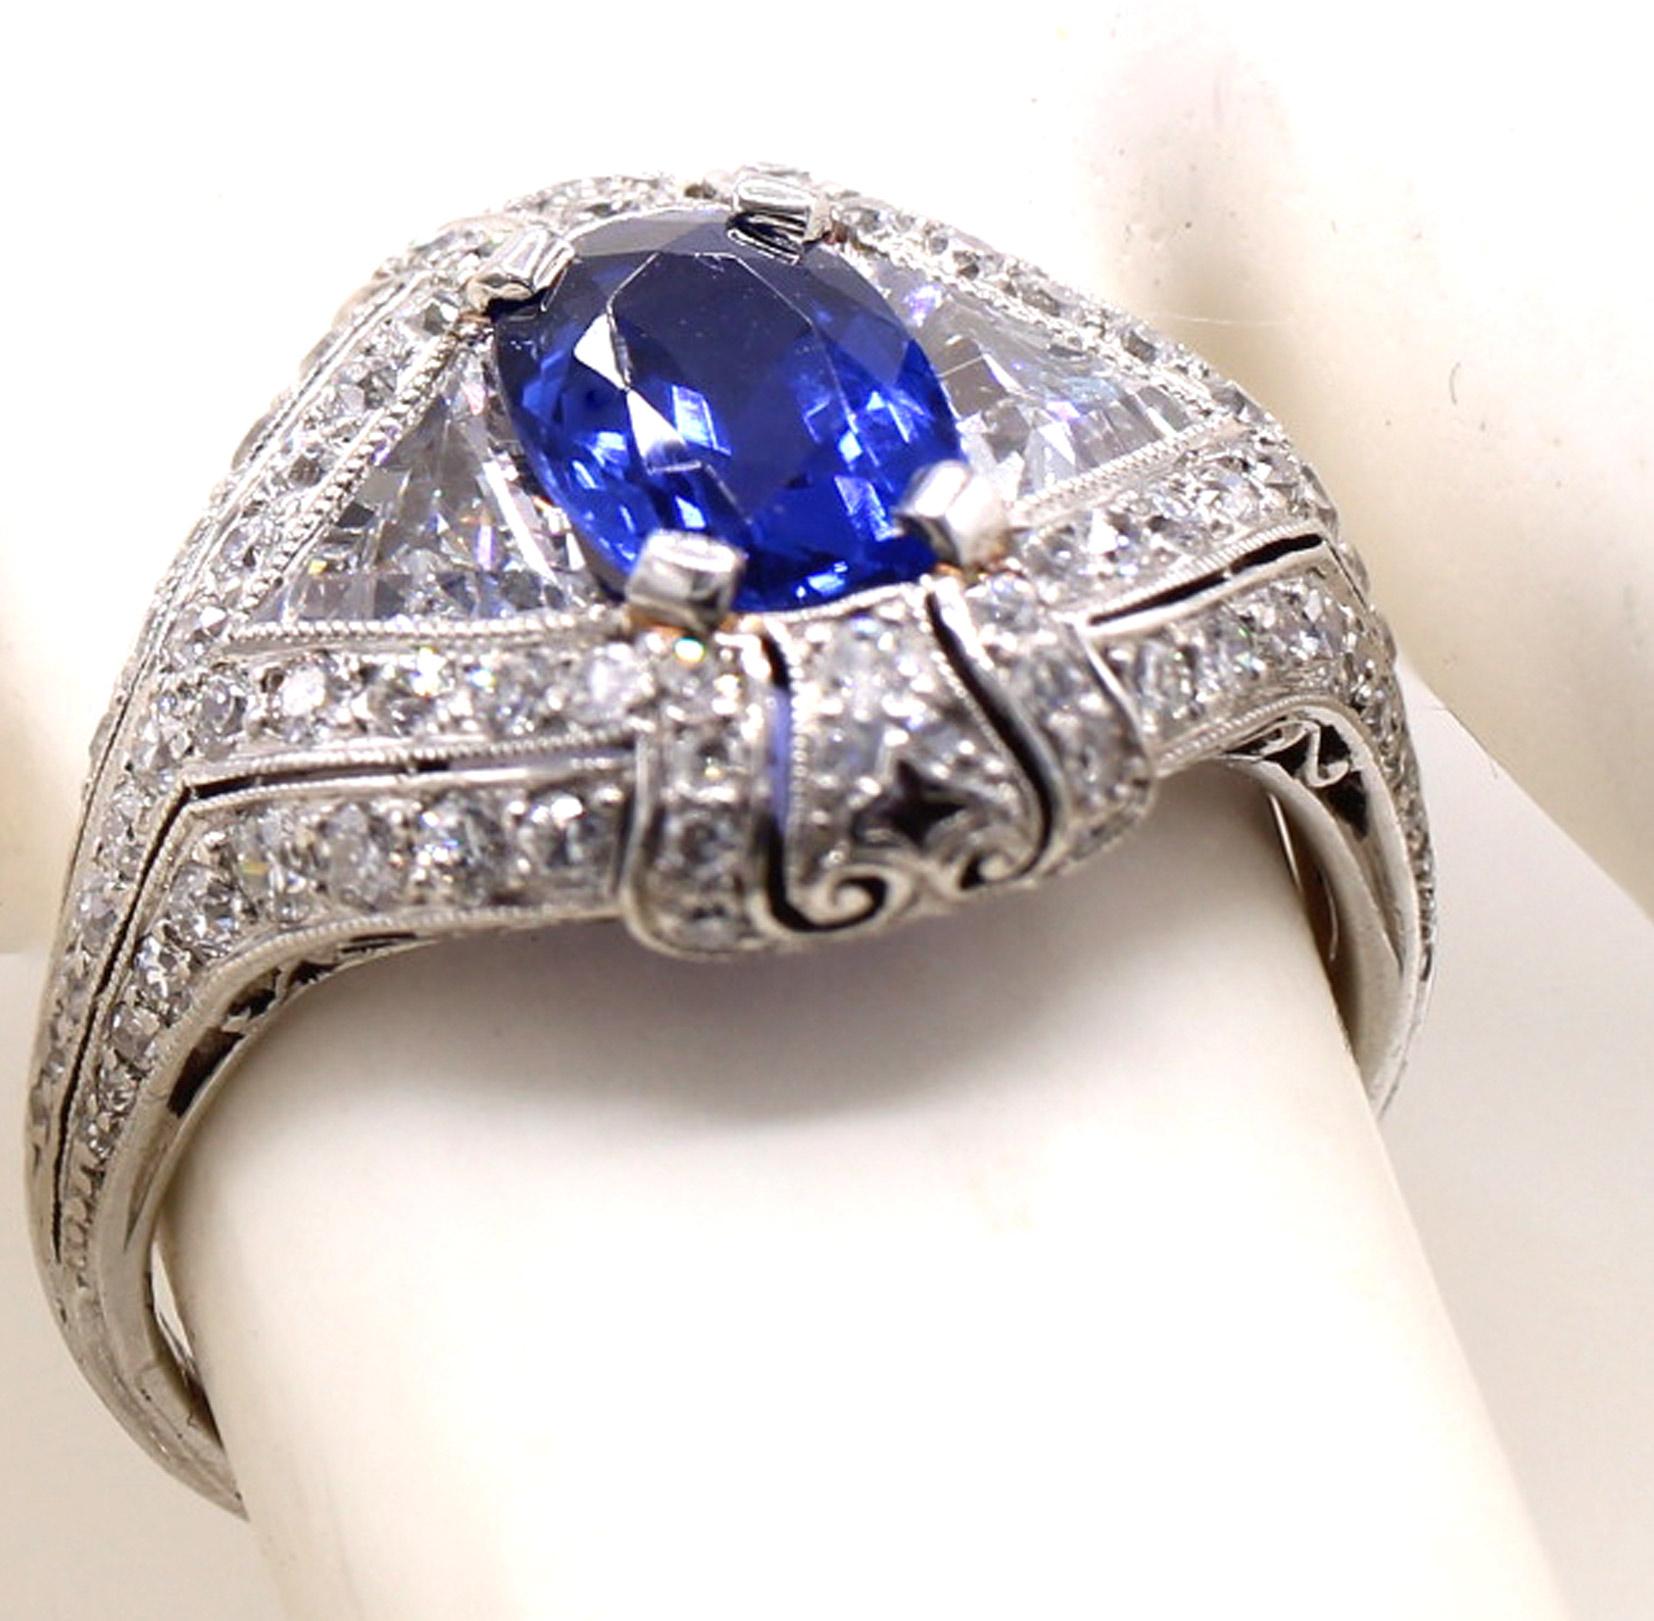 Tiffany & Co. Art Deco Burma Sapphire Diamond Platinum Ring In Excellent Condition For Sale In New York, NY